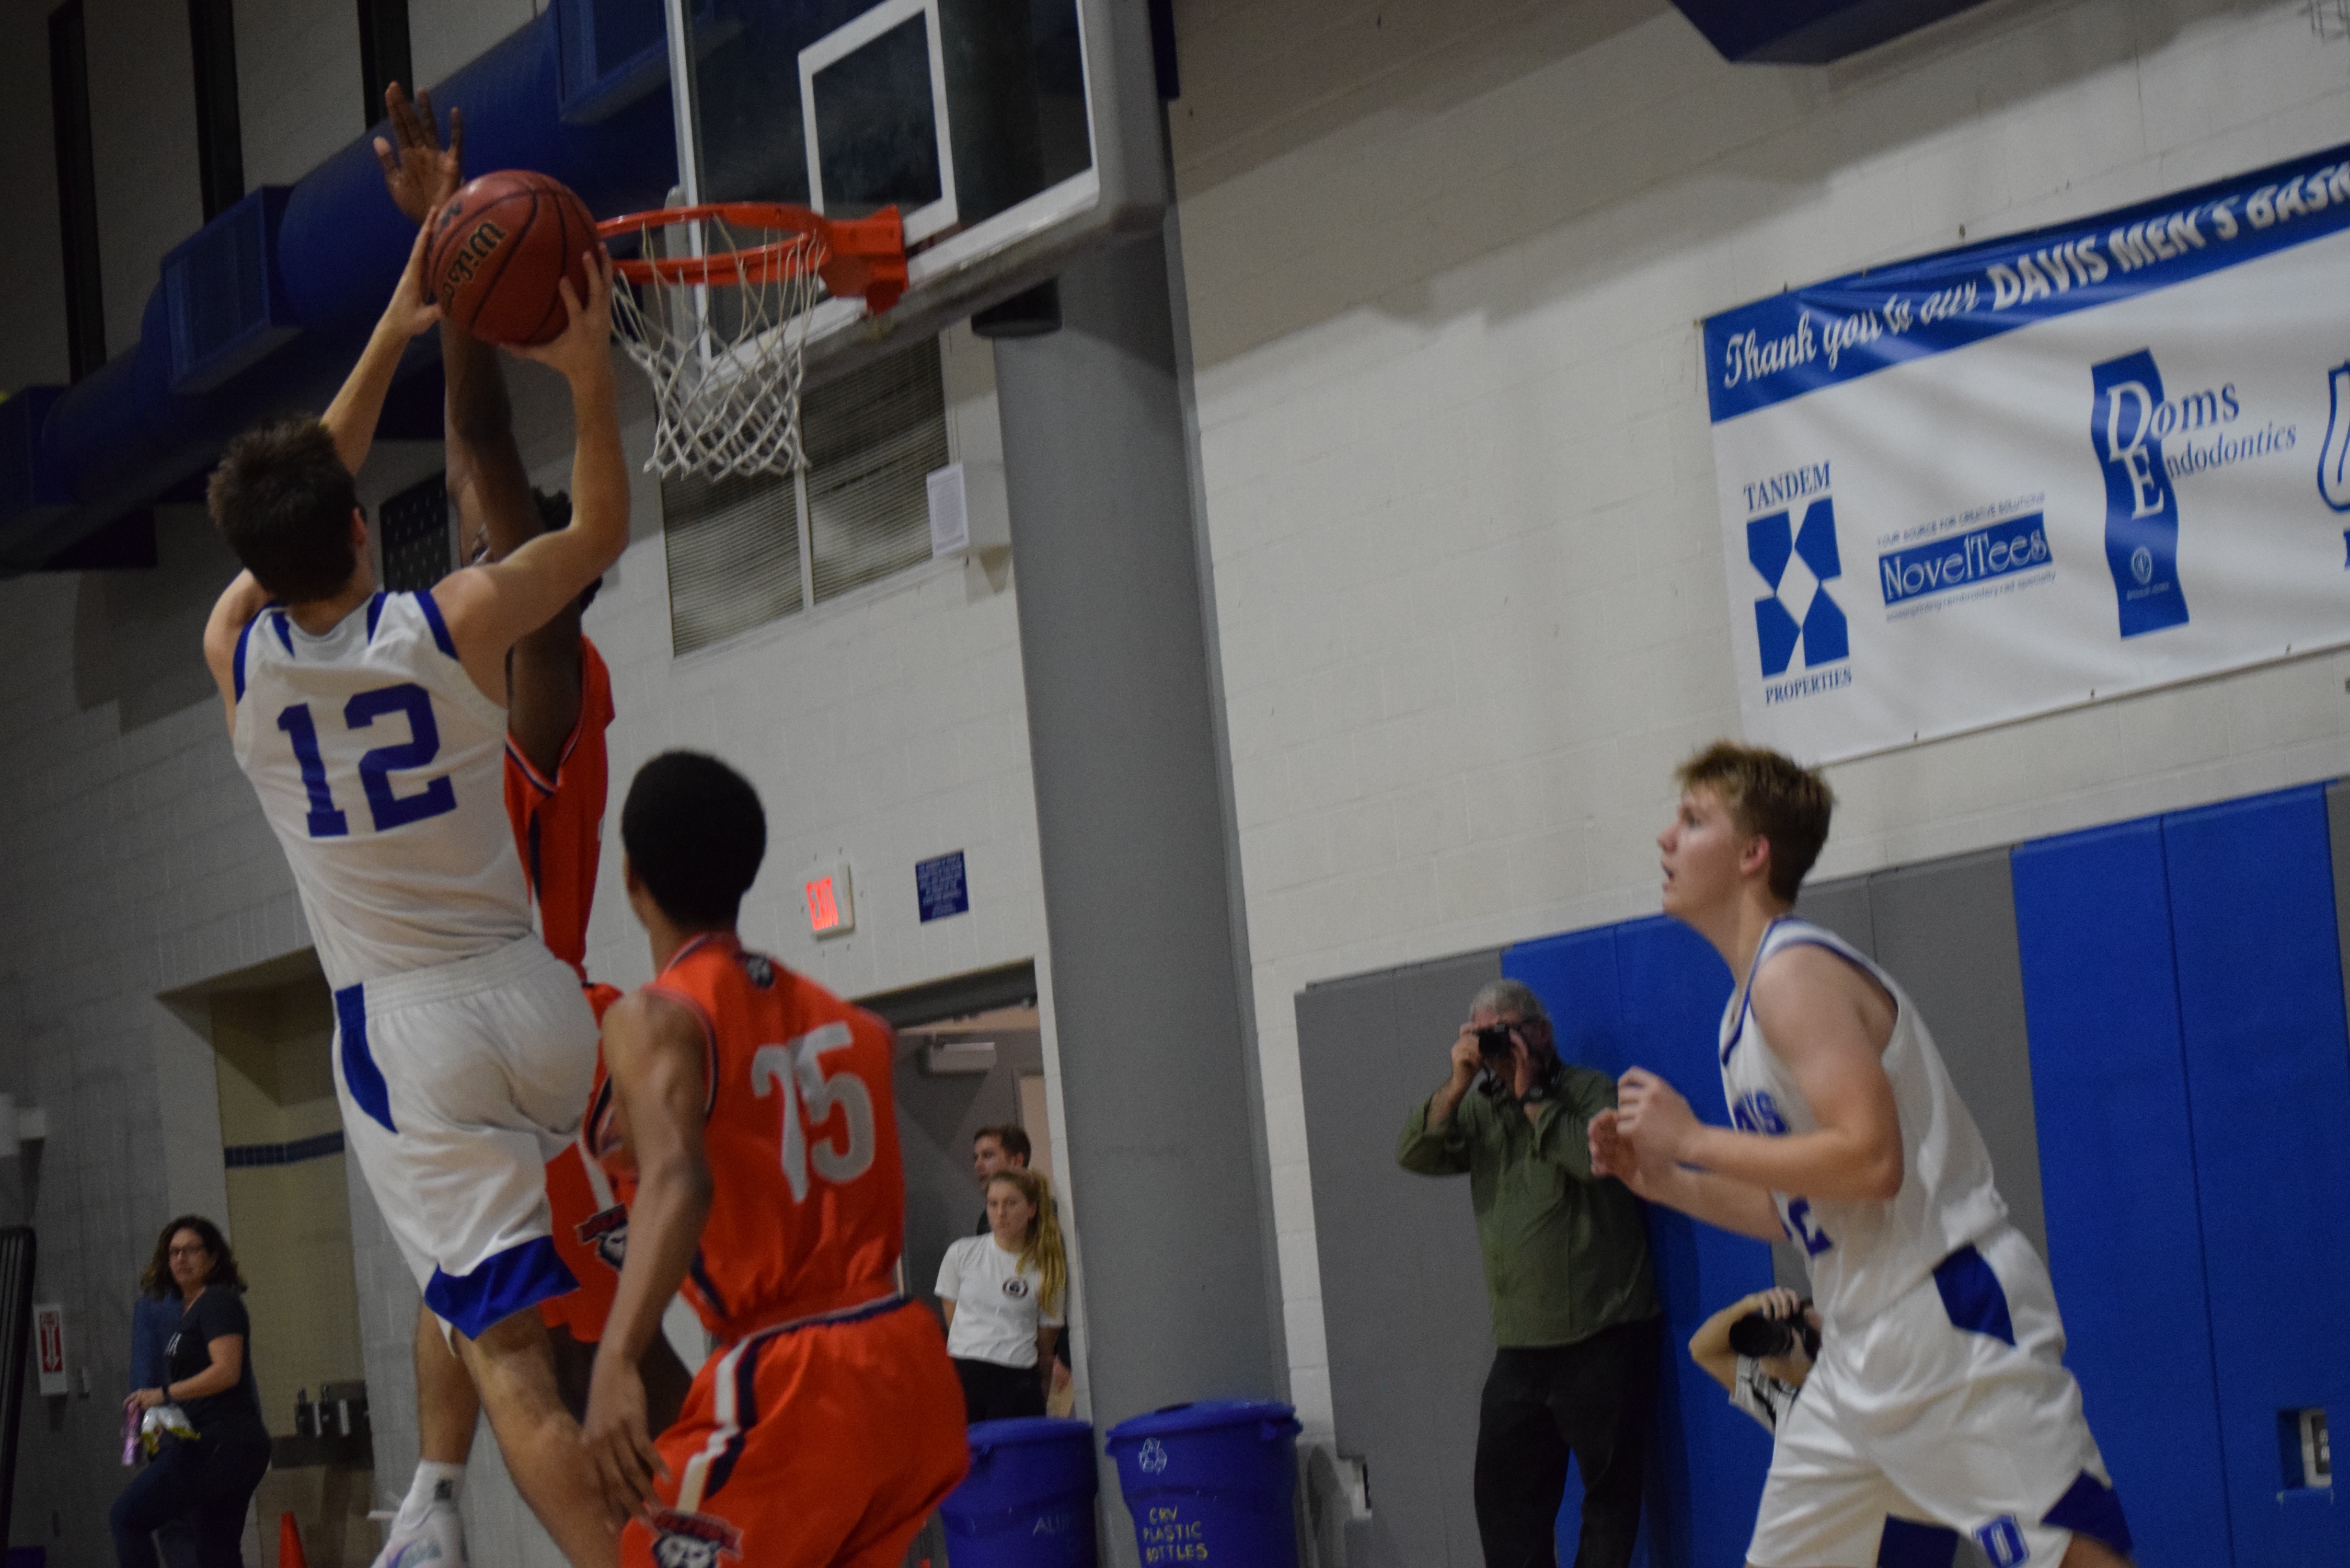 Junior Joey Voss goes for the dunk.